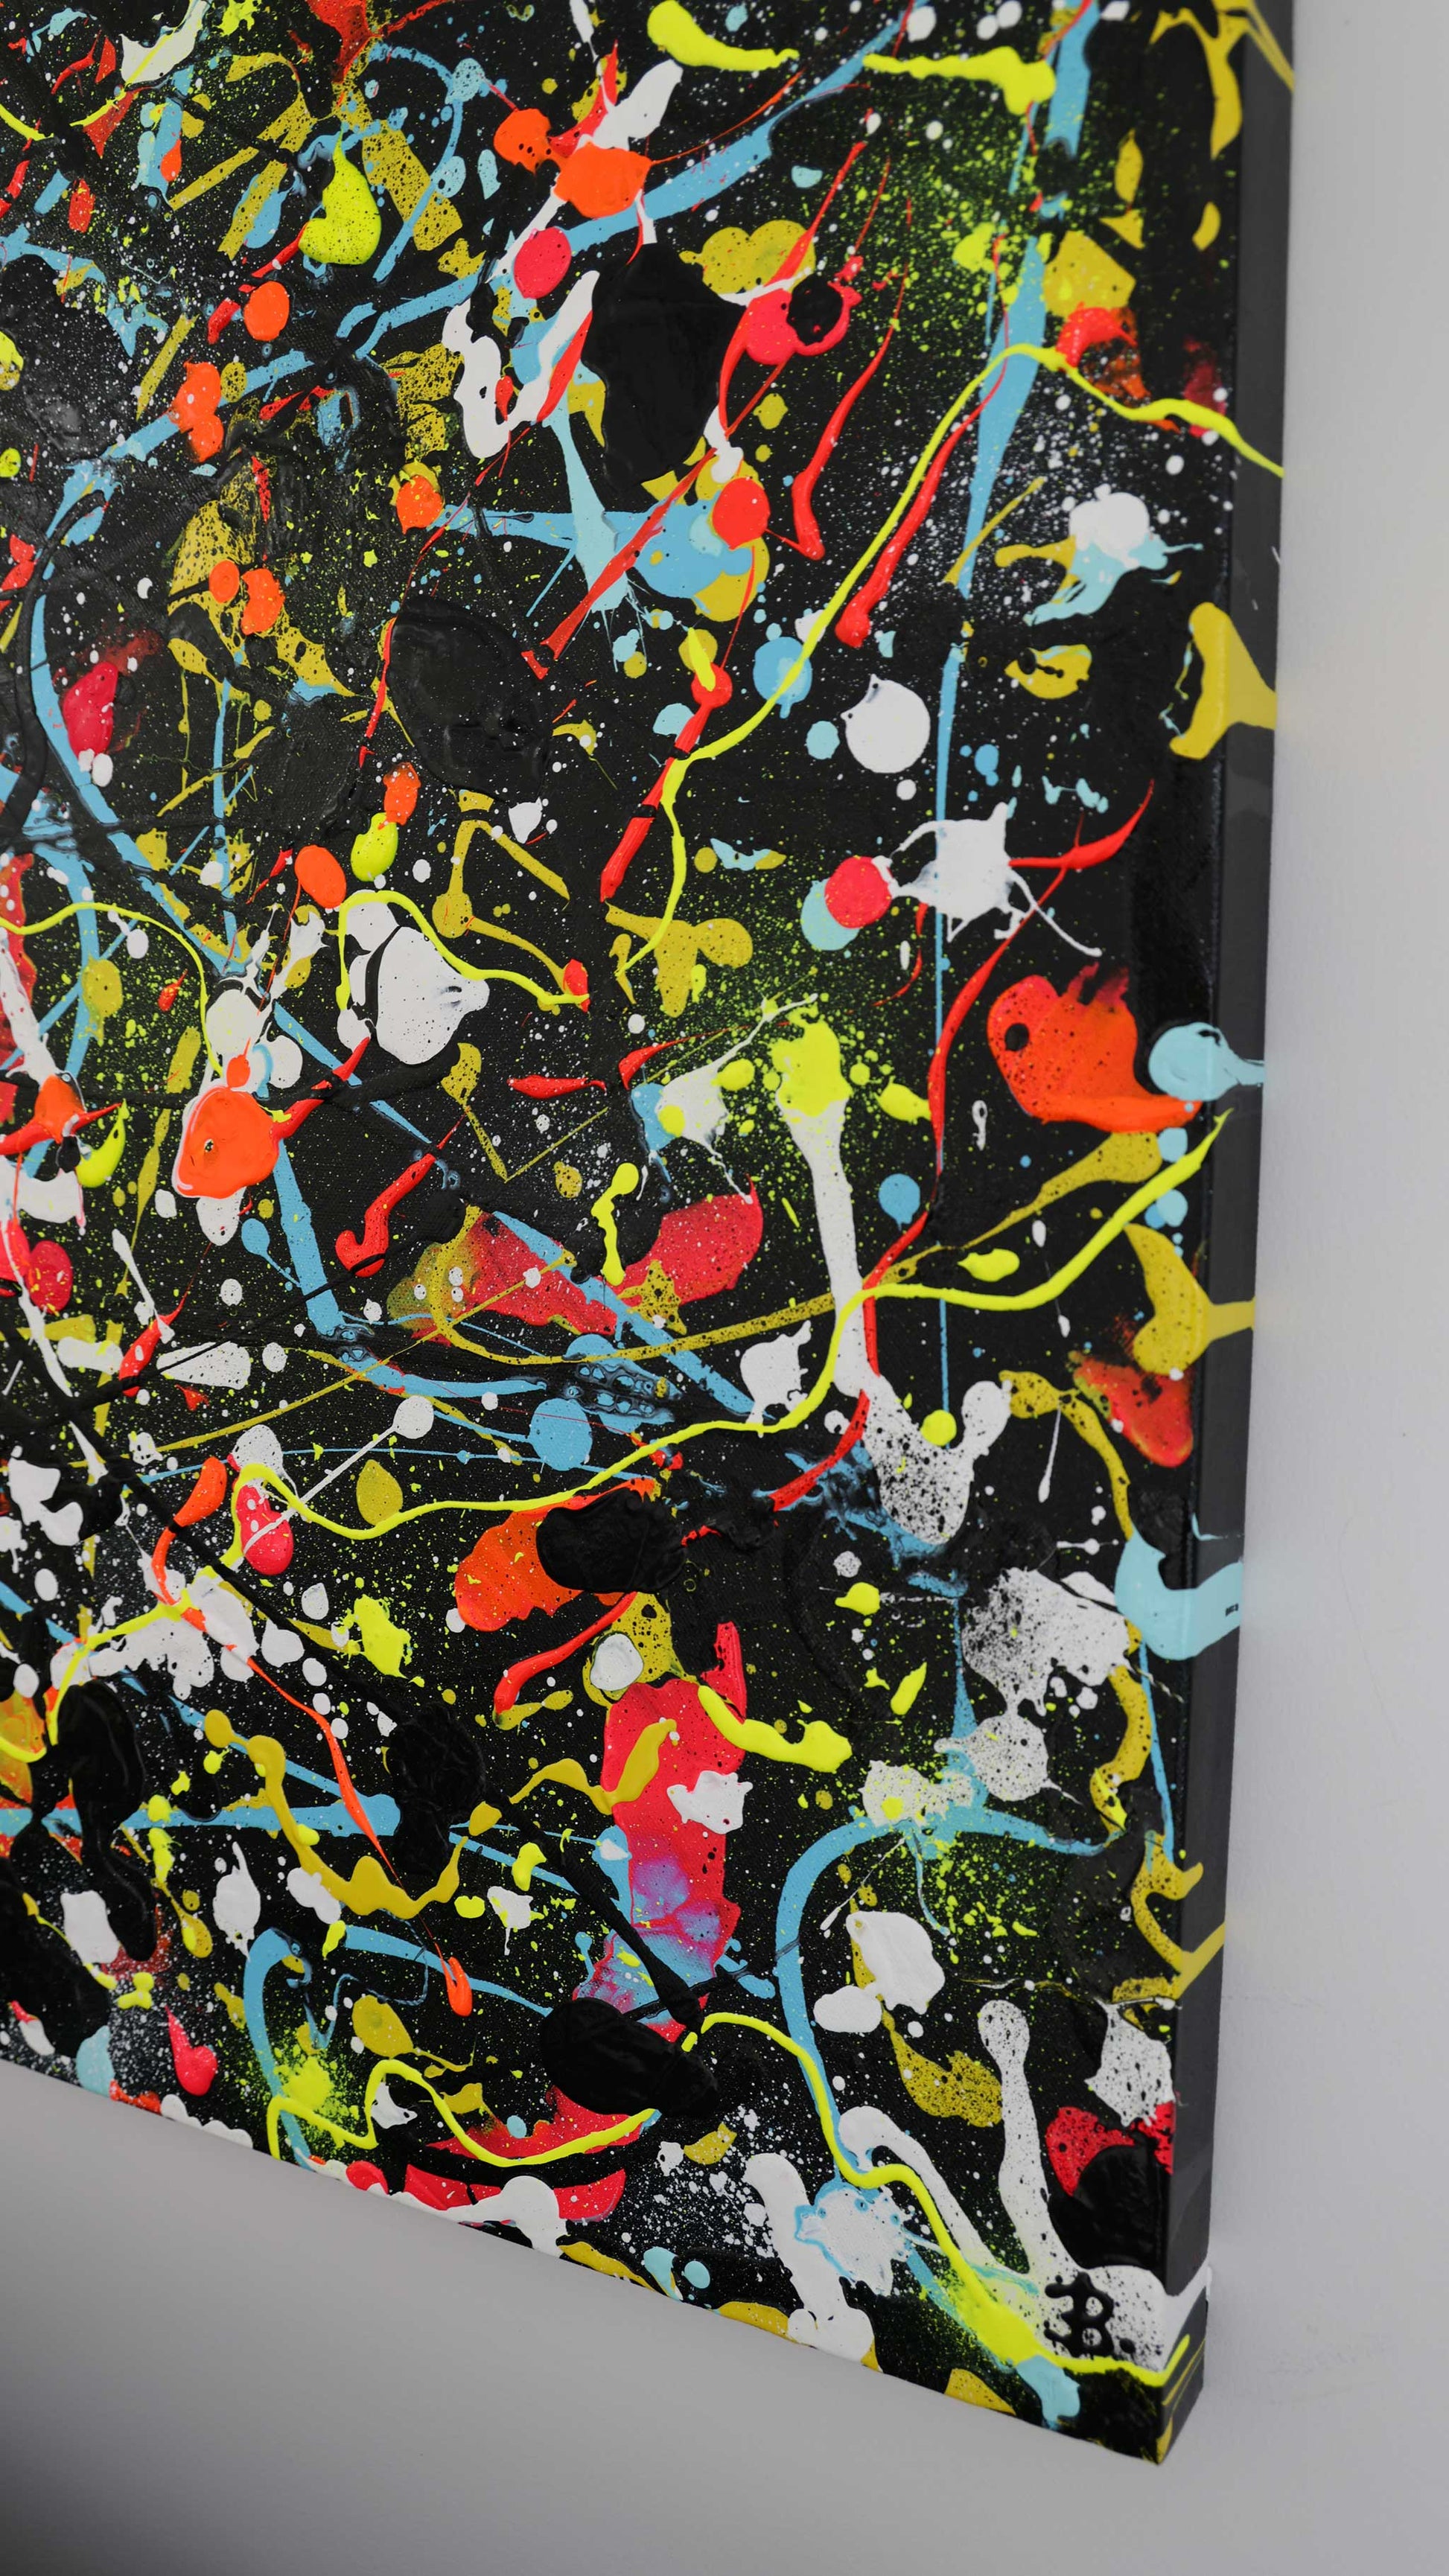 Colourful Abstract, Original Painting Up Close. Unique canvas art by Bridget Bradley, contemporary Abstract Artist